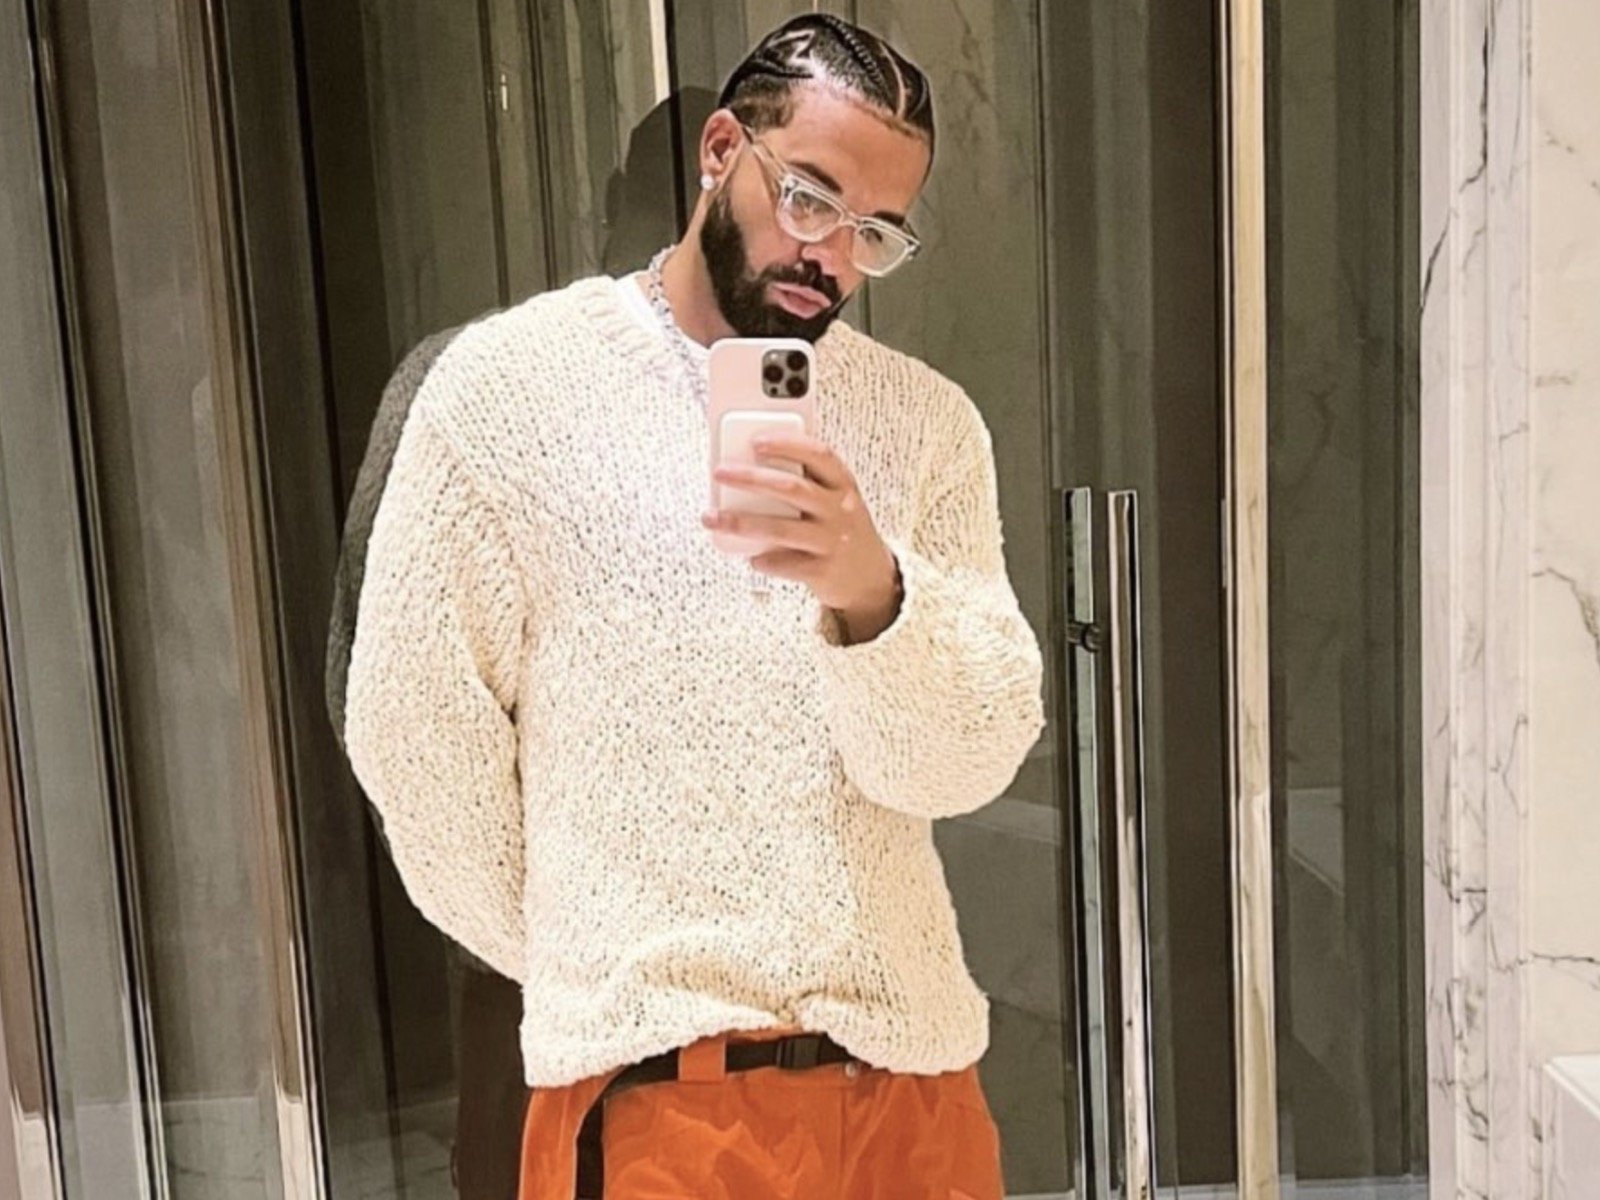 Drake is also a selfie god these days too — Attack The Culture